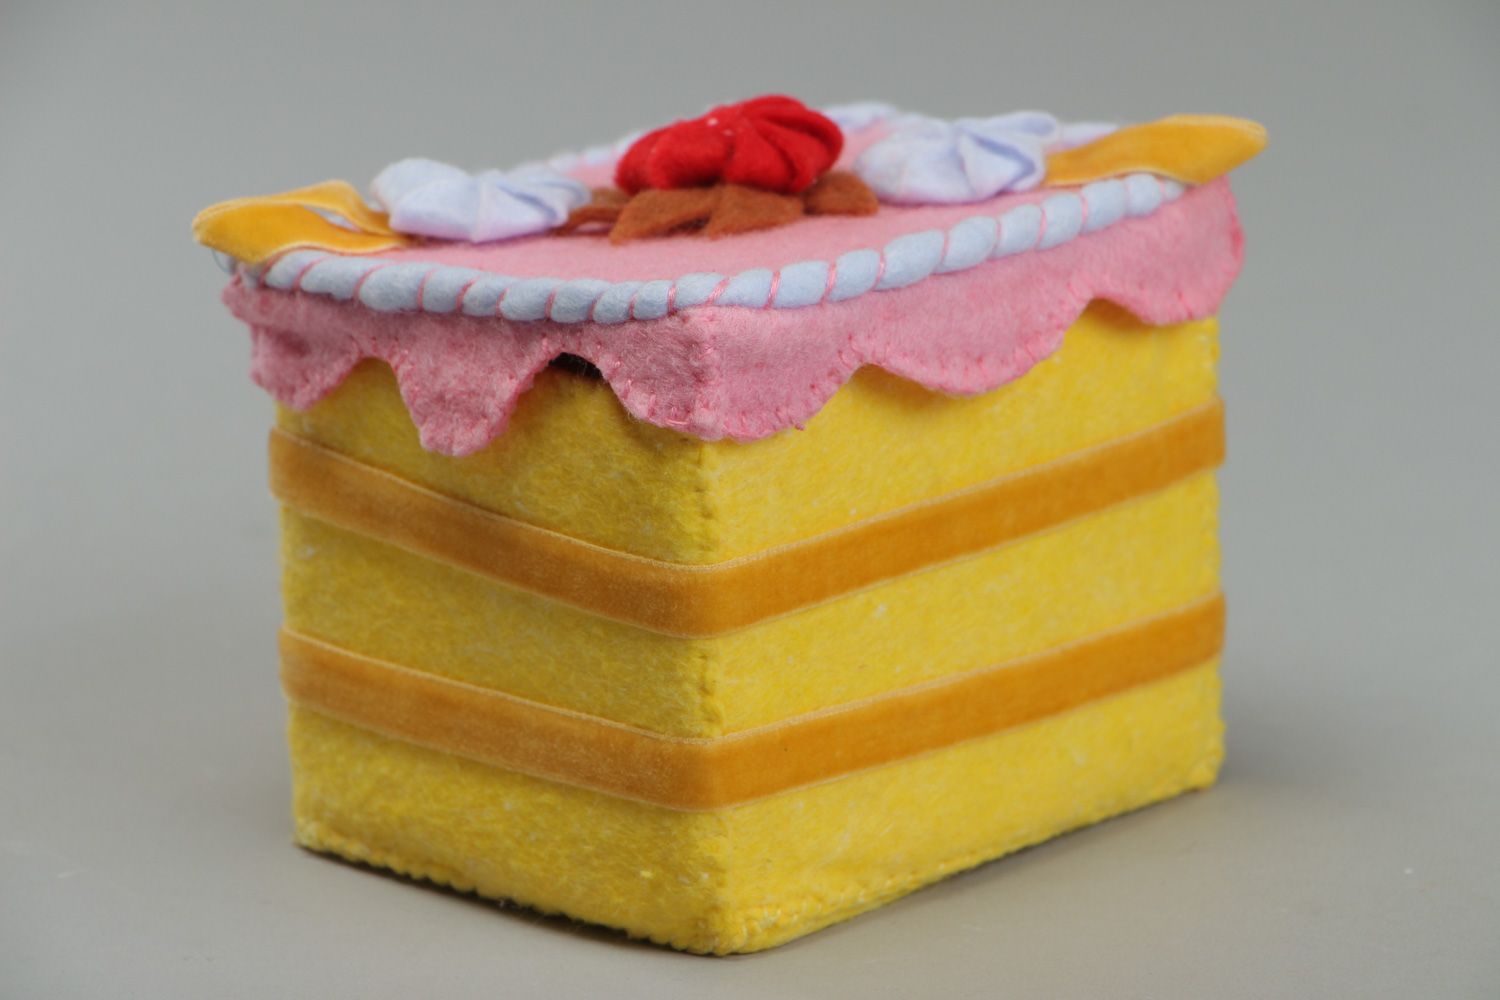 Handmade children's colorful jewelry box made of felt in the shape of a cake photo 1